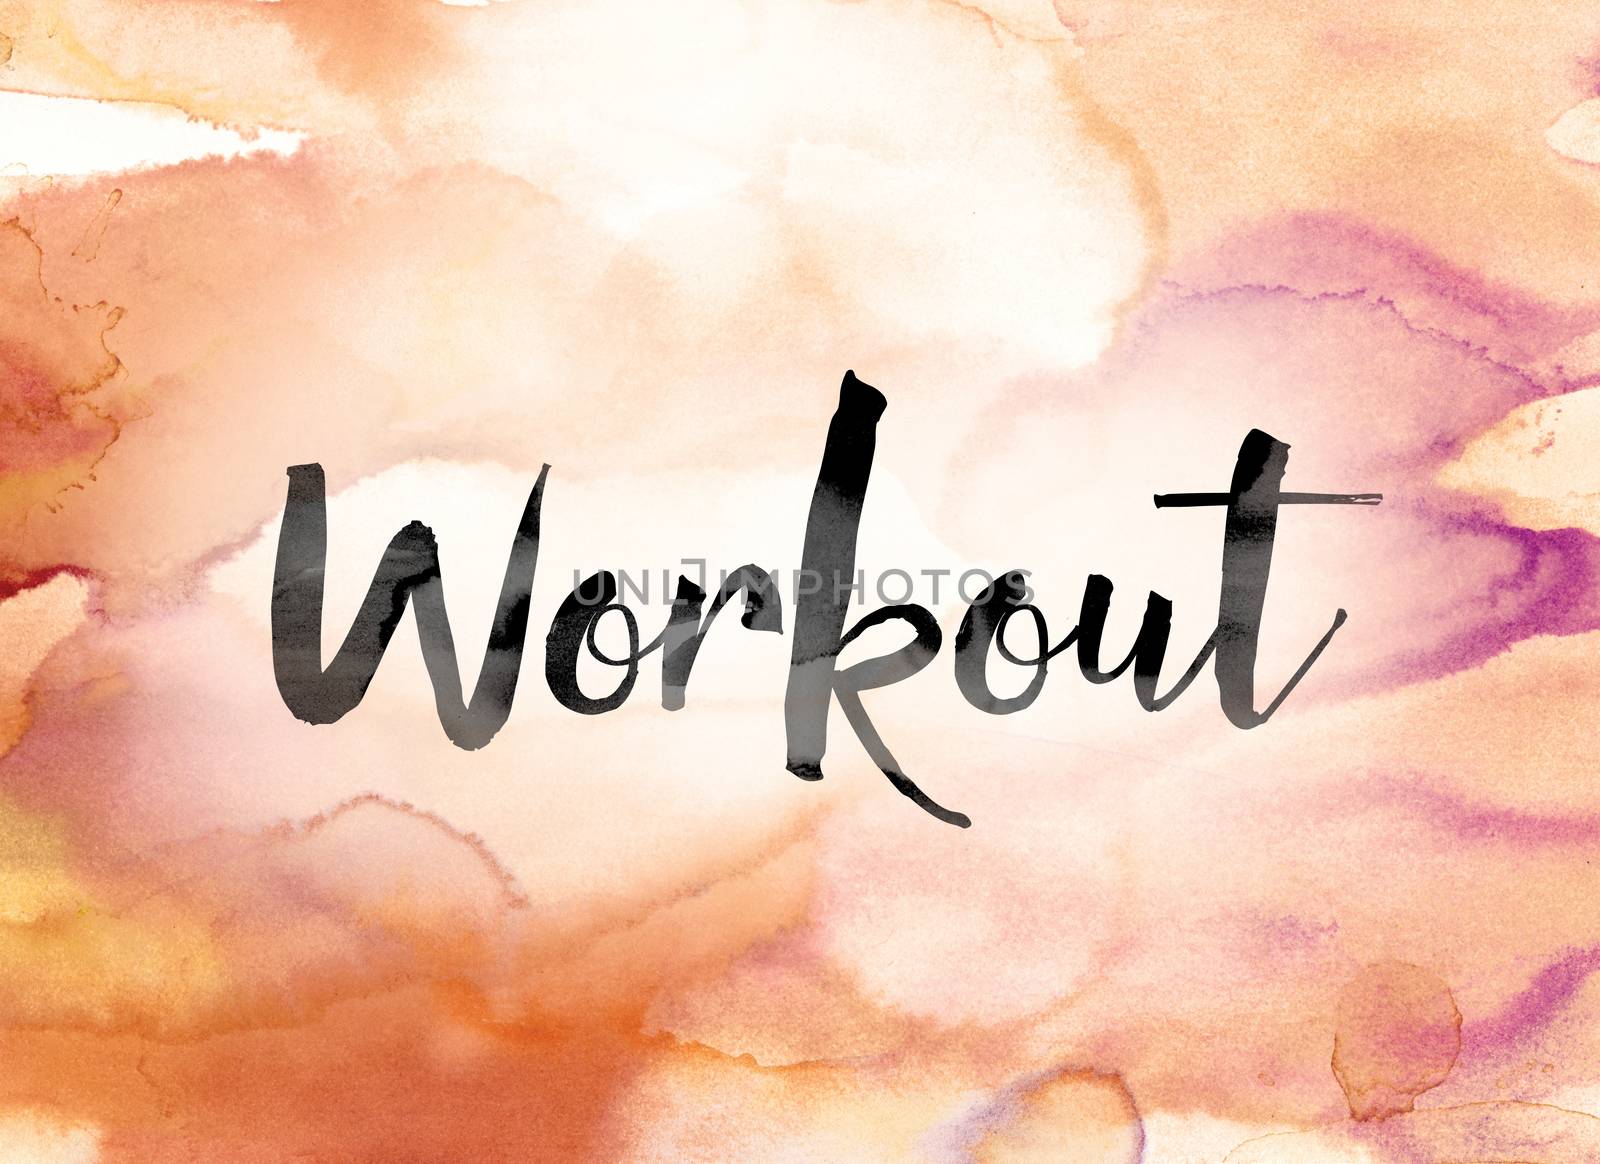 The word "Workout" painted in black ink over a colorful watercolor washed background concept and theme.